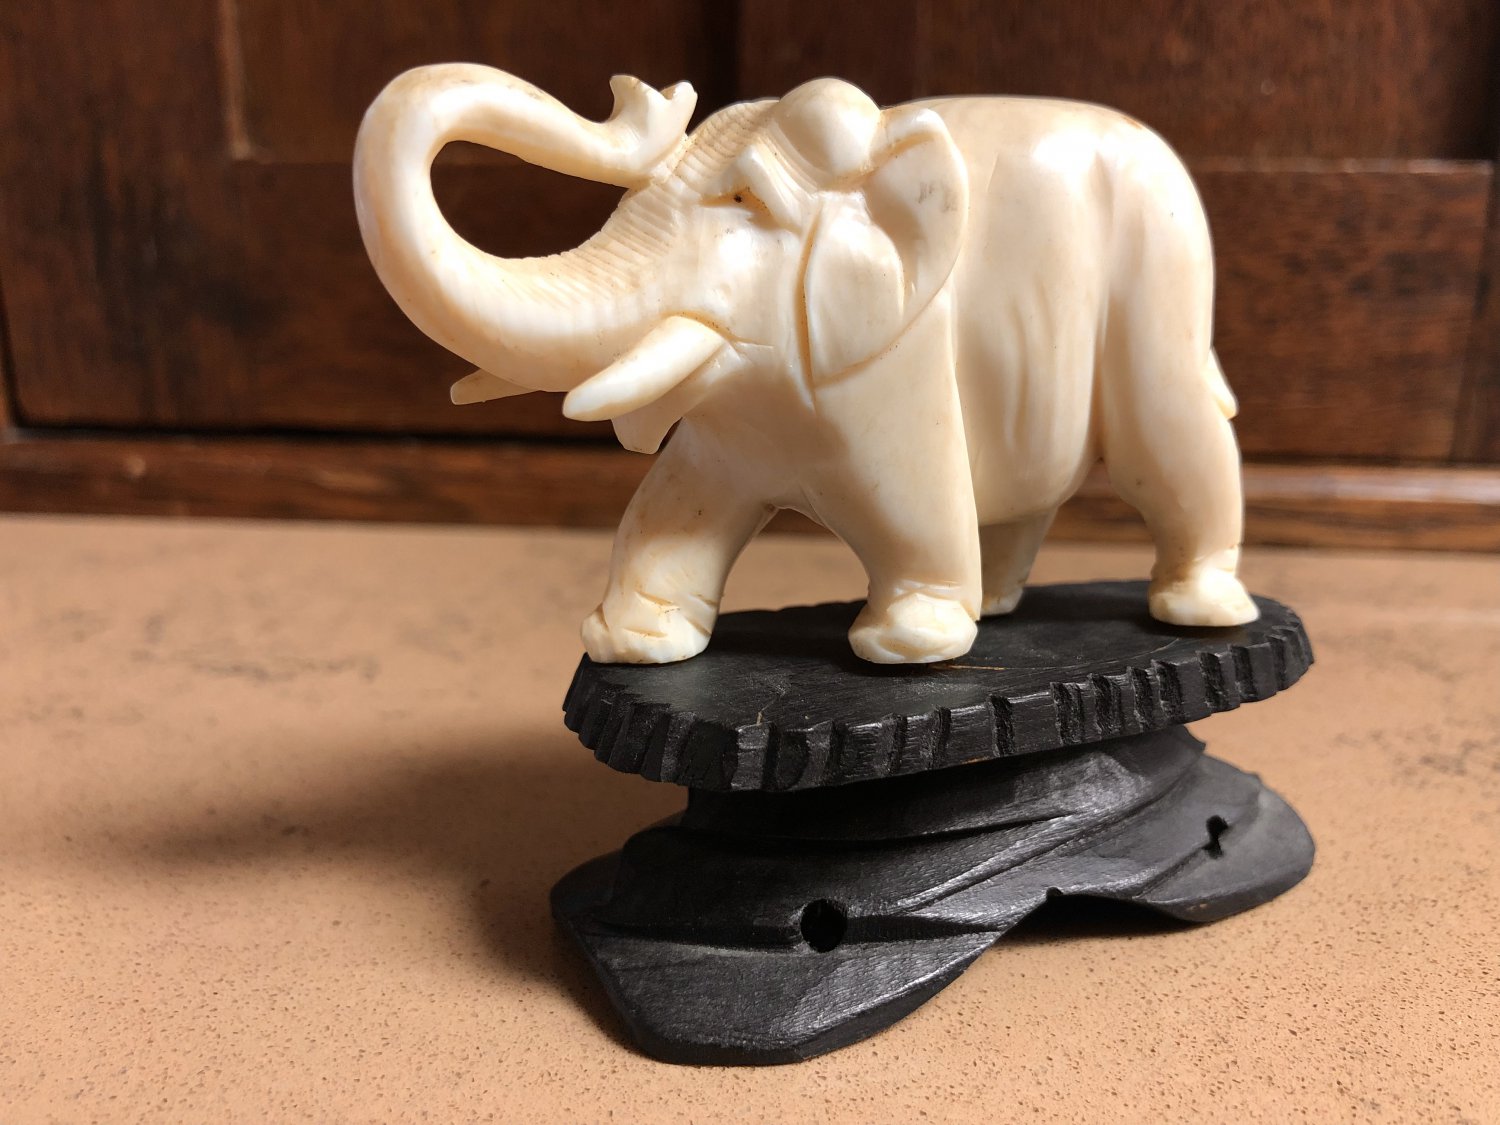 Well Carved Natural Material Elephant on Stand